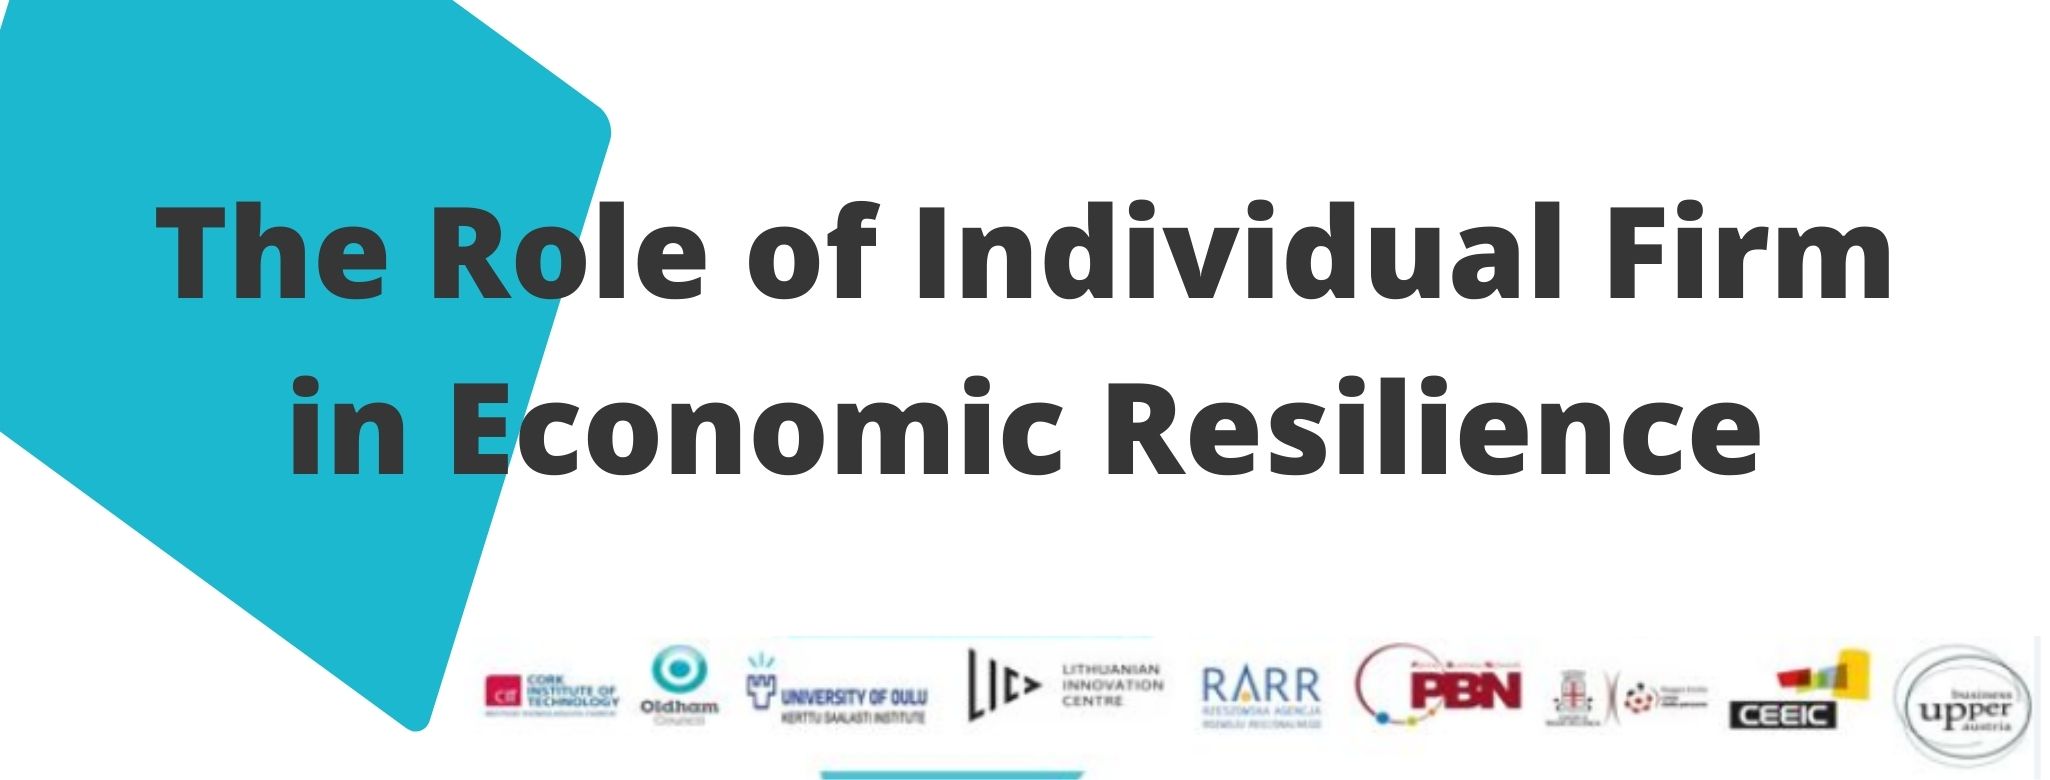 Summary - Individual Firms Economic Resilience